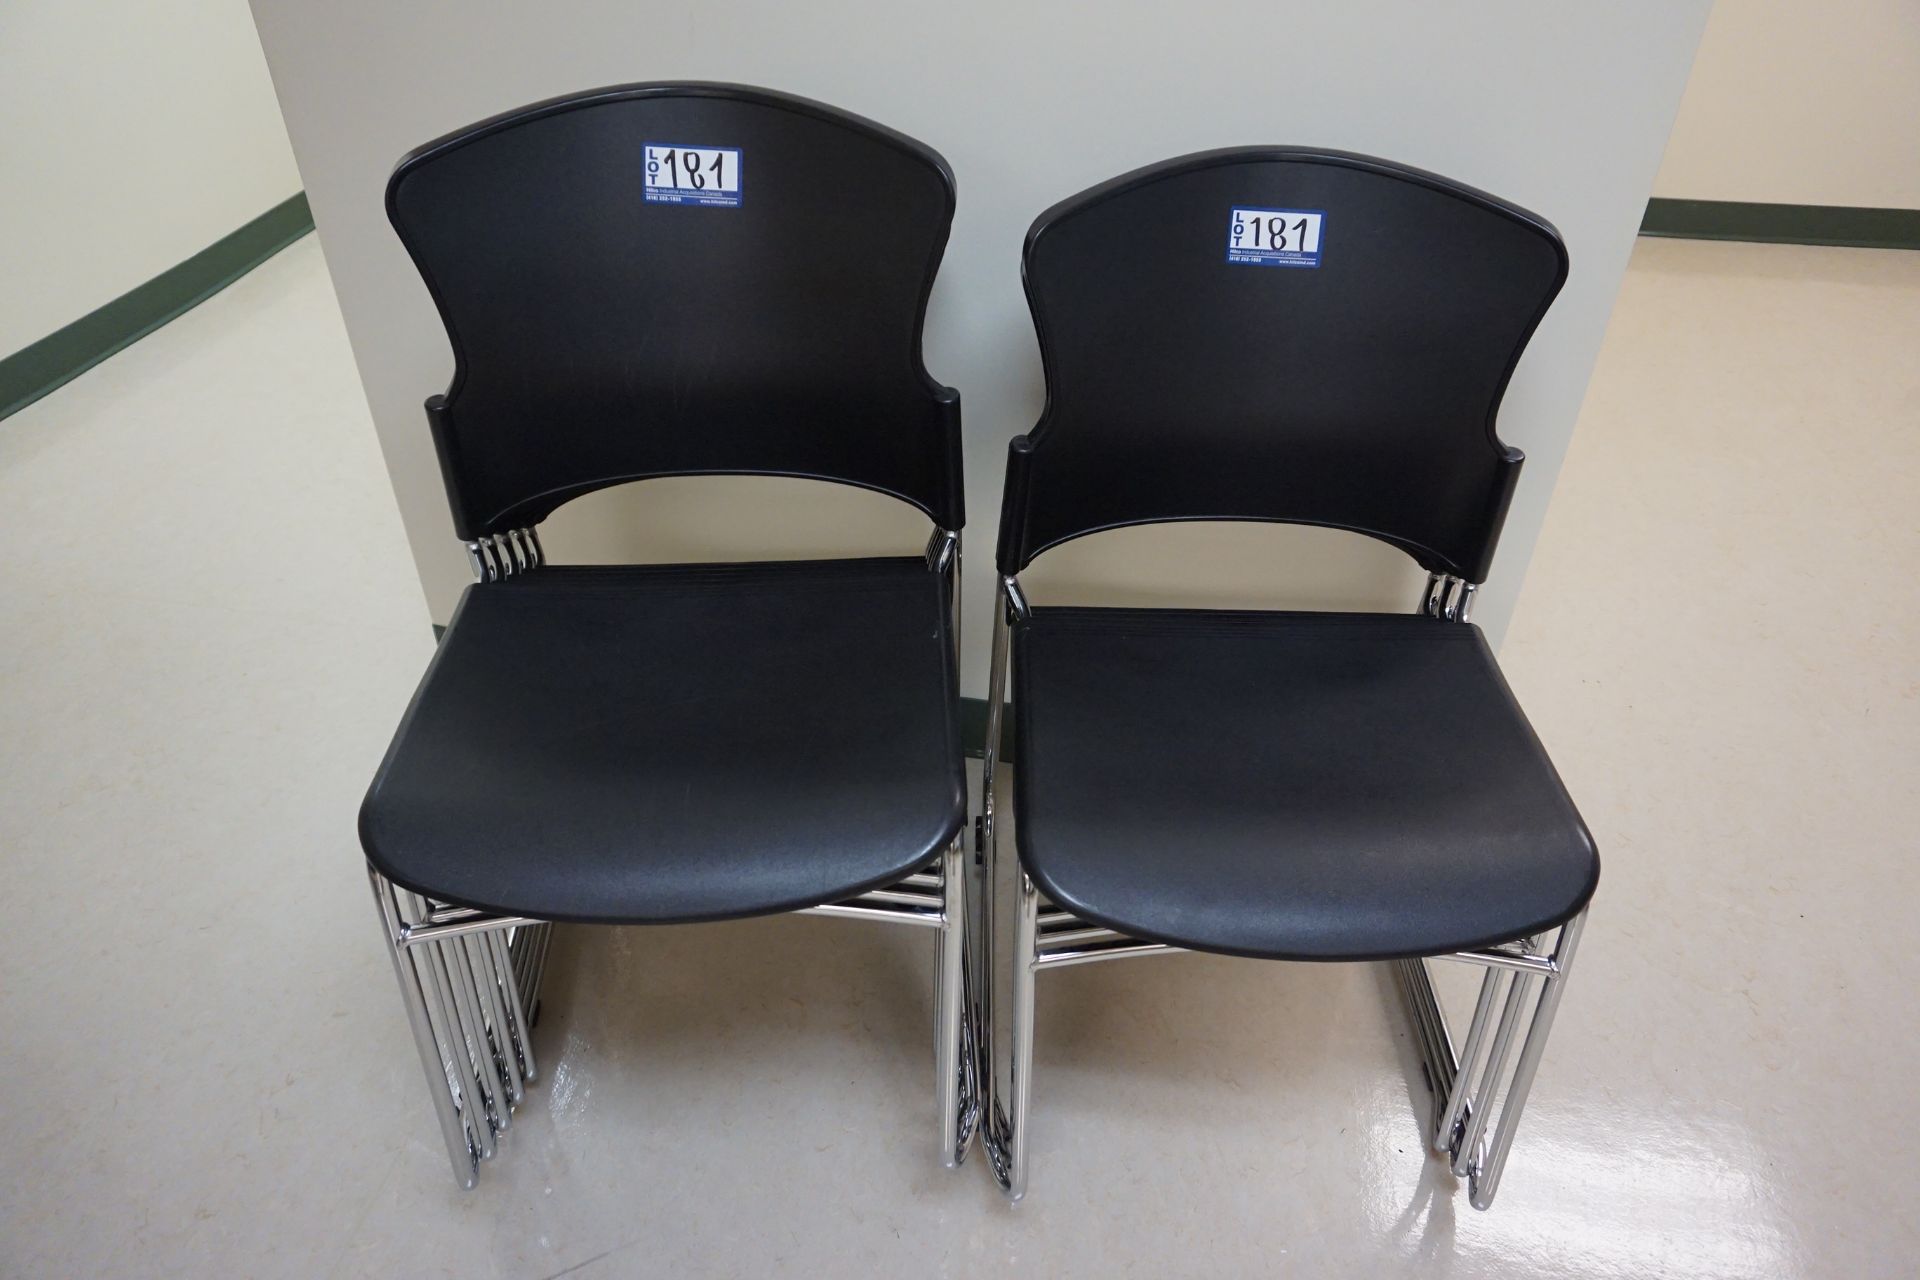 Model 3050 Black/Chrome Stacking Chairs